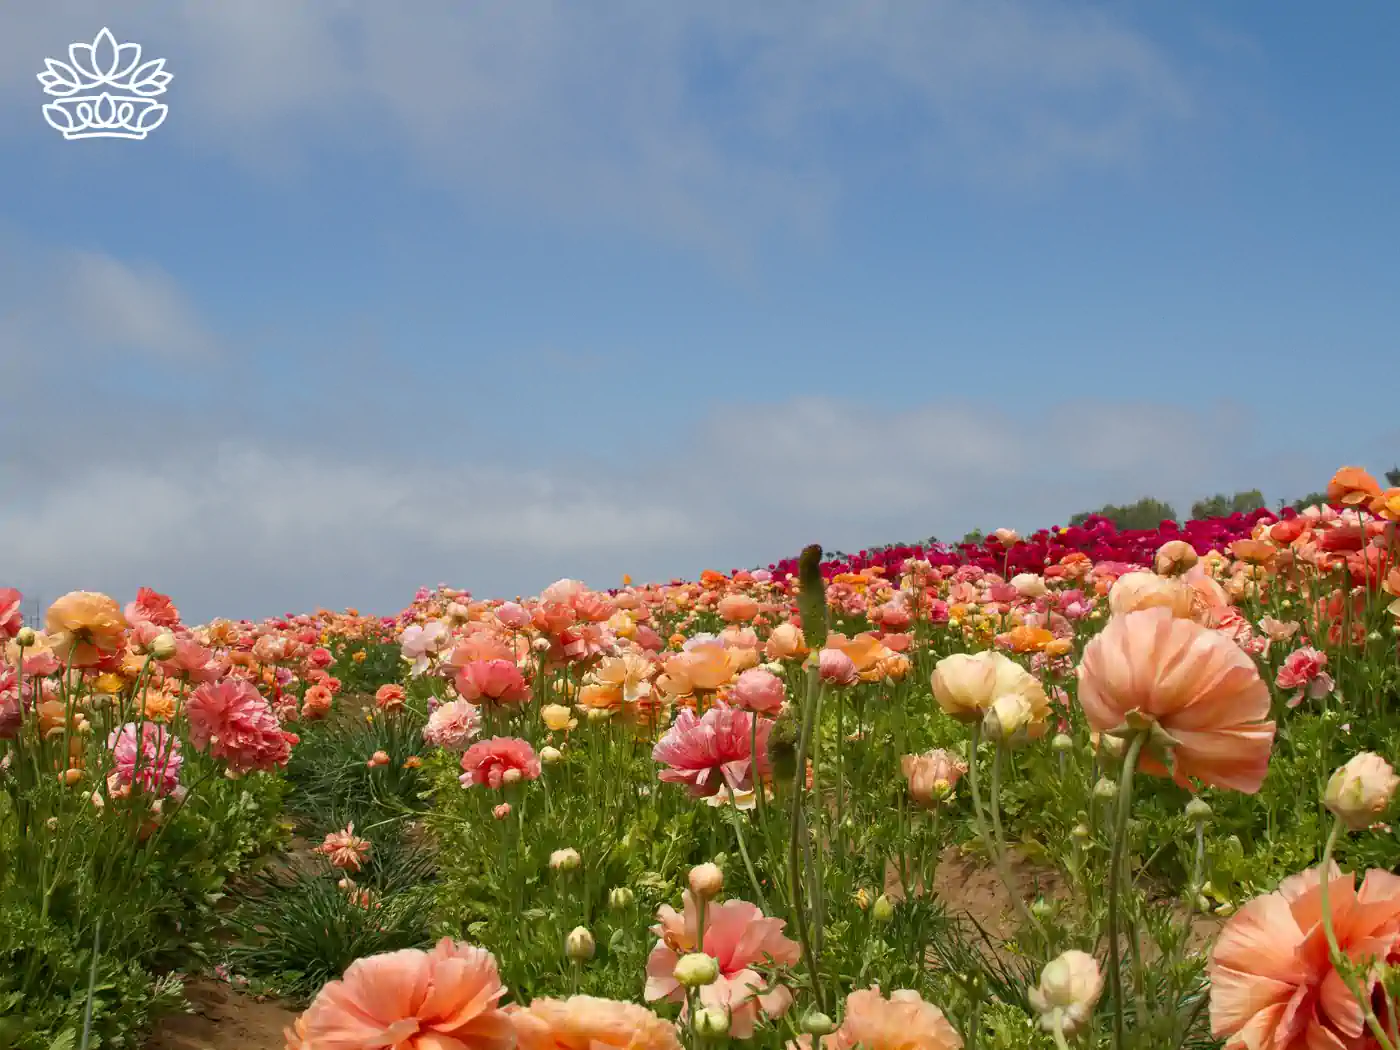 A vibrant field of multicolored ranunculus flowers in full bloom under a clear blue sky, epitomizing the beauty and diversity of nature. Fabulous Flowers and Gifts: Flower Arrangements Under R500, Delivered with Heart.